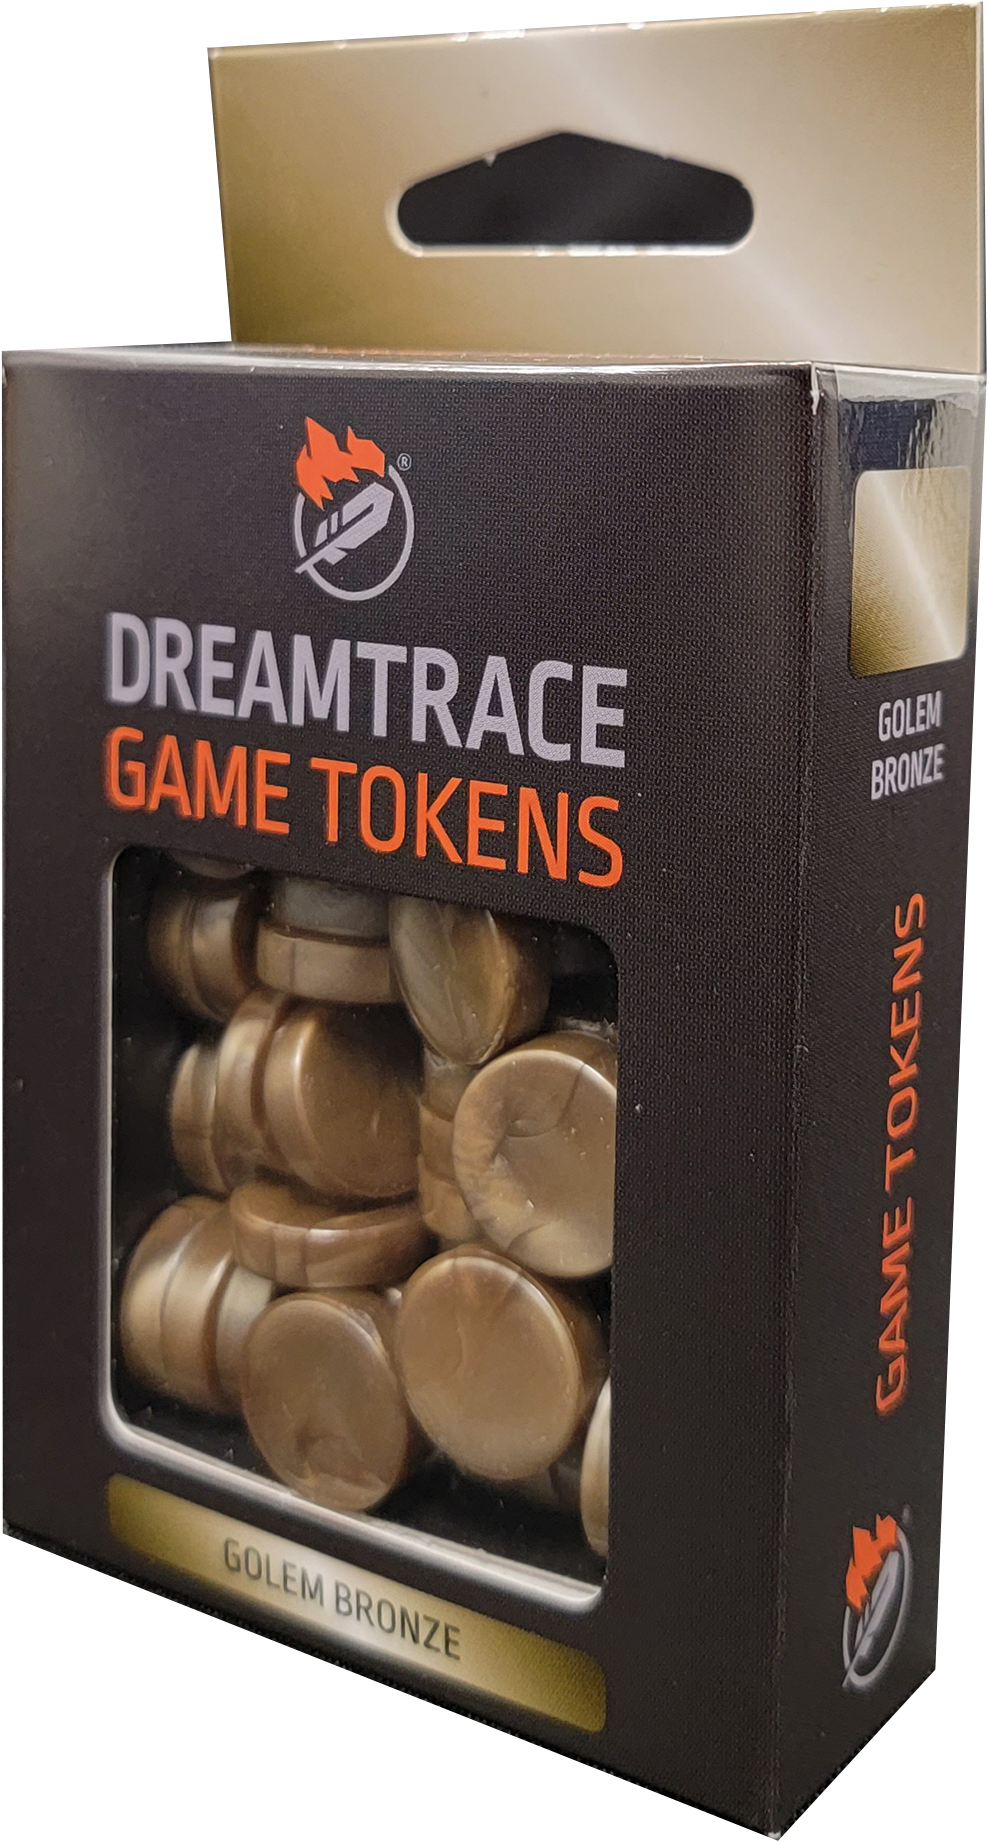 Dreamtrace Gaming Tokens: Golem Bronze 